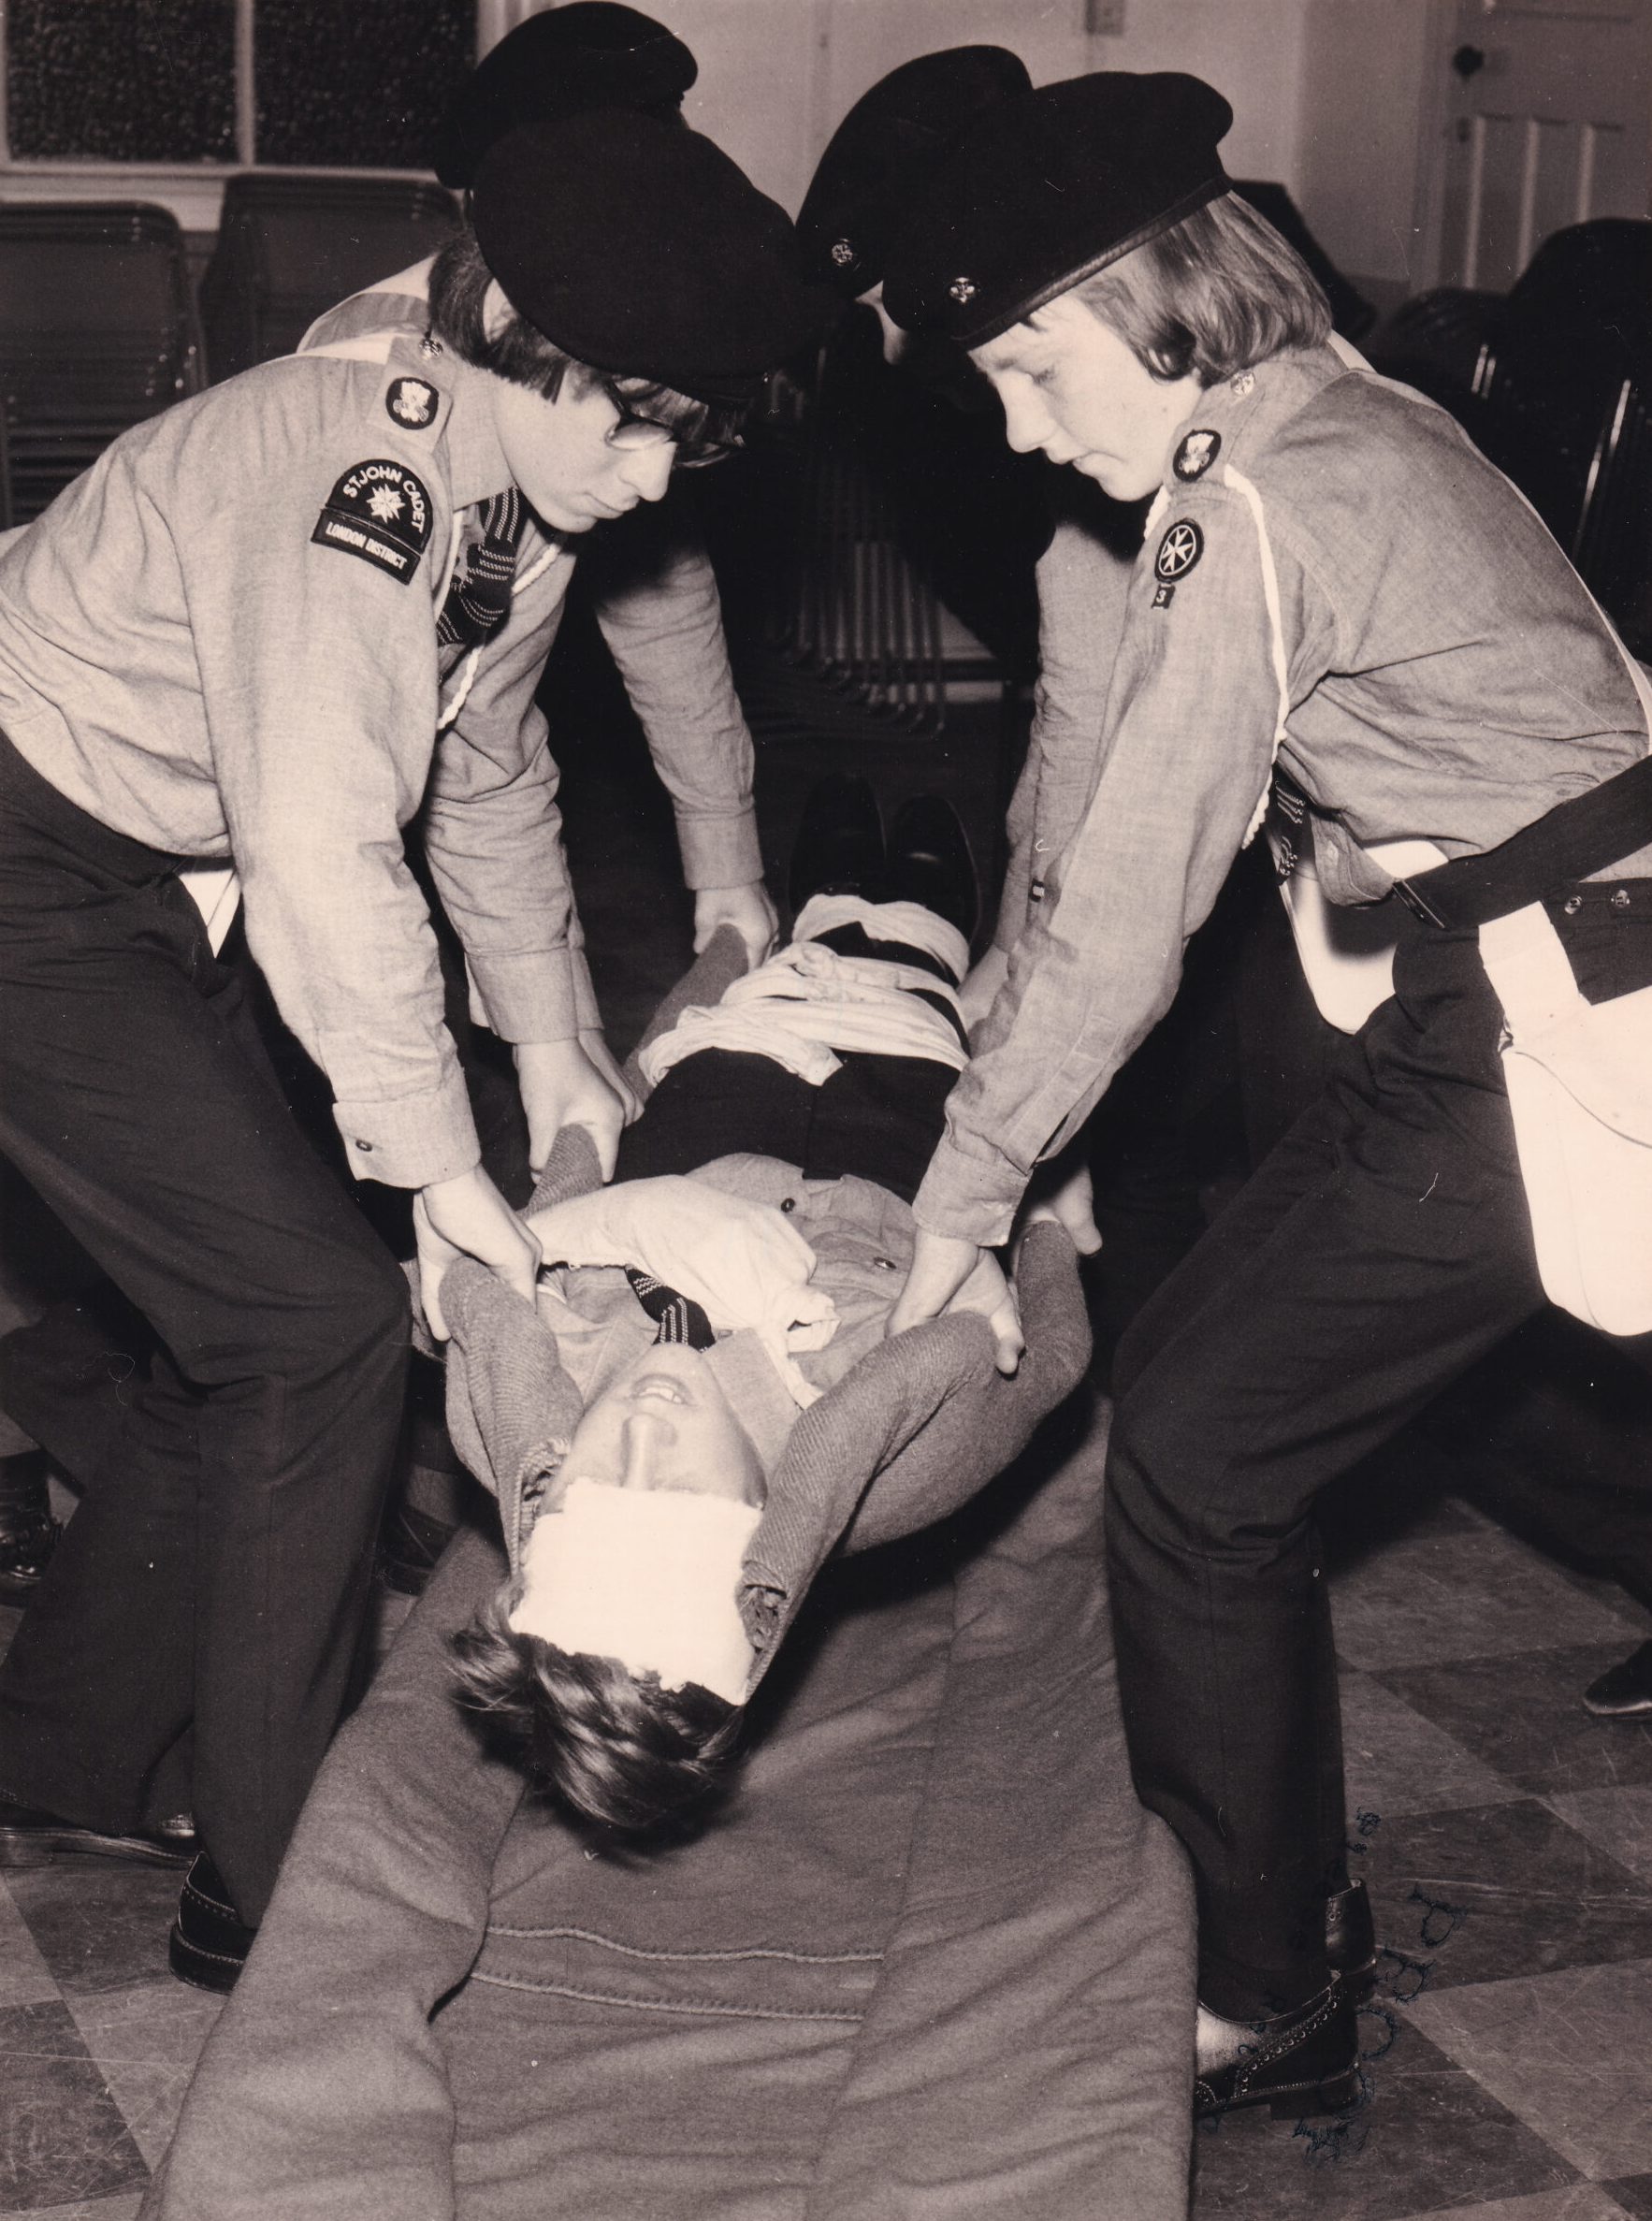 Black and white photograph of four Cadets in uniform treating a fifth Cadet who is lying on the floor as a casulty simulation. They are in the process of moving the lying person to a stretcher.